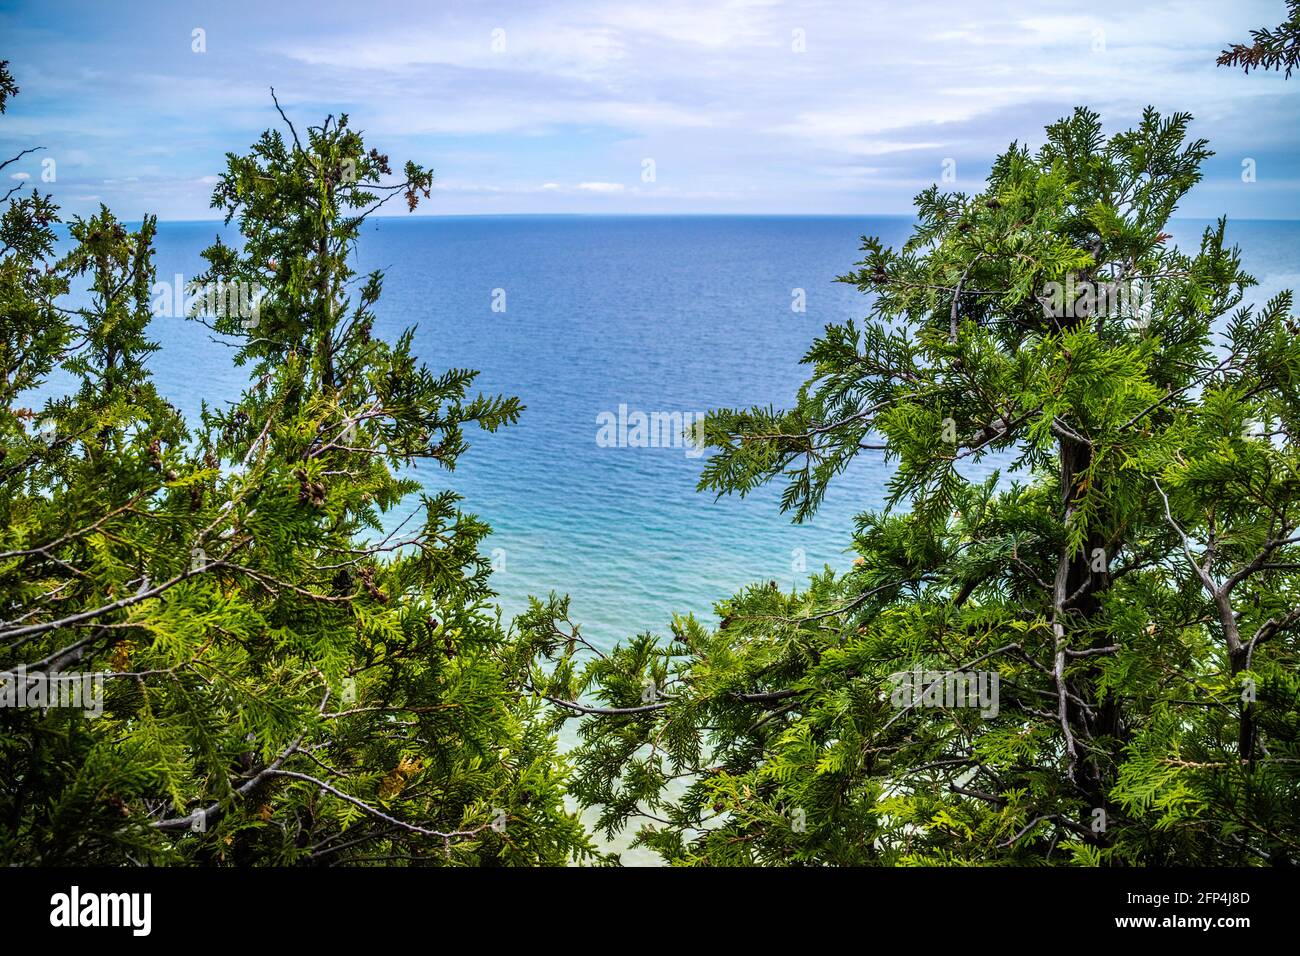 The peaceful view of the bay in Mackinac Island St. Ignace, Michigan Stock Photo